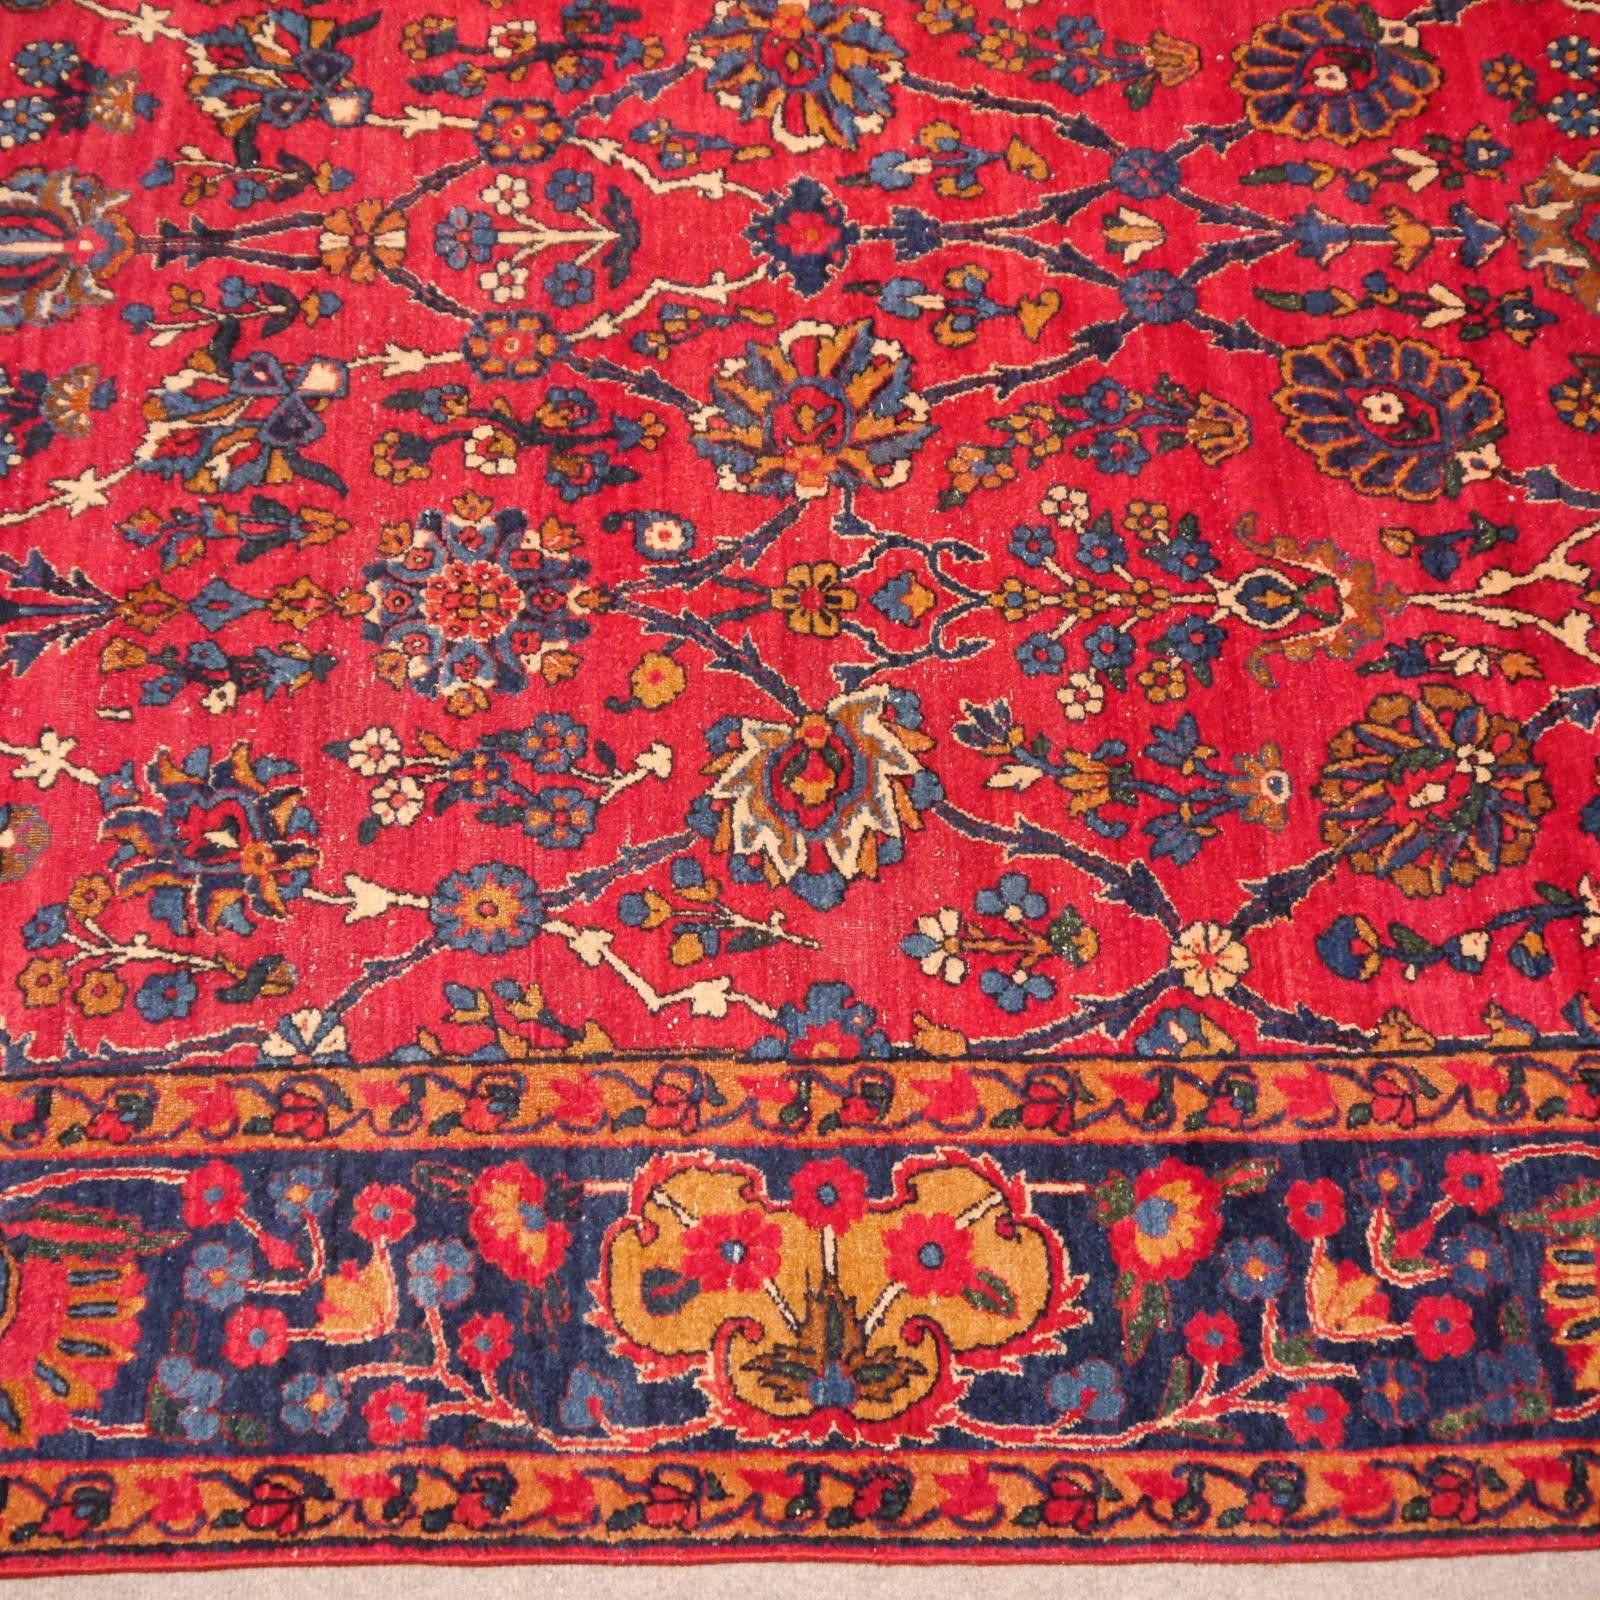 Wool Antique Indian Agra Rug hand knotted red blue gold For Sale